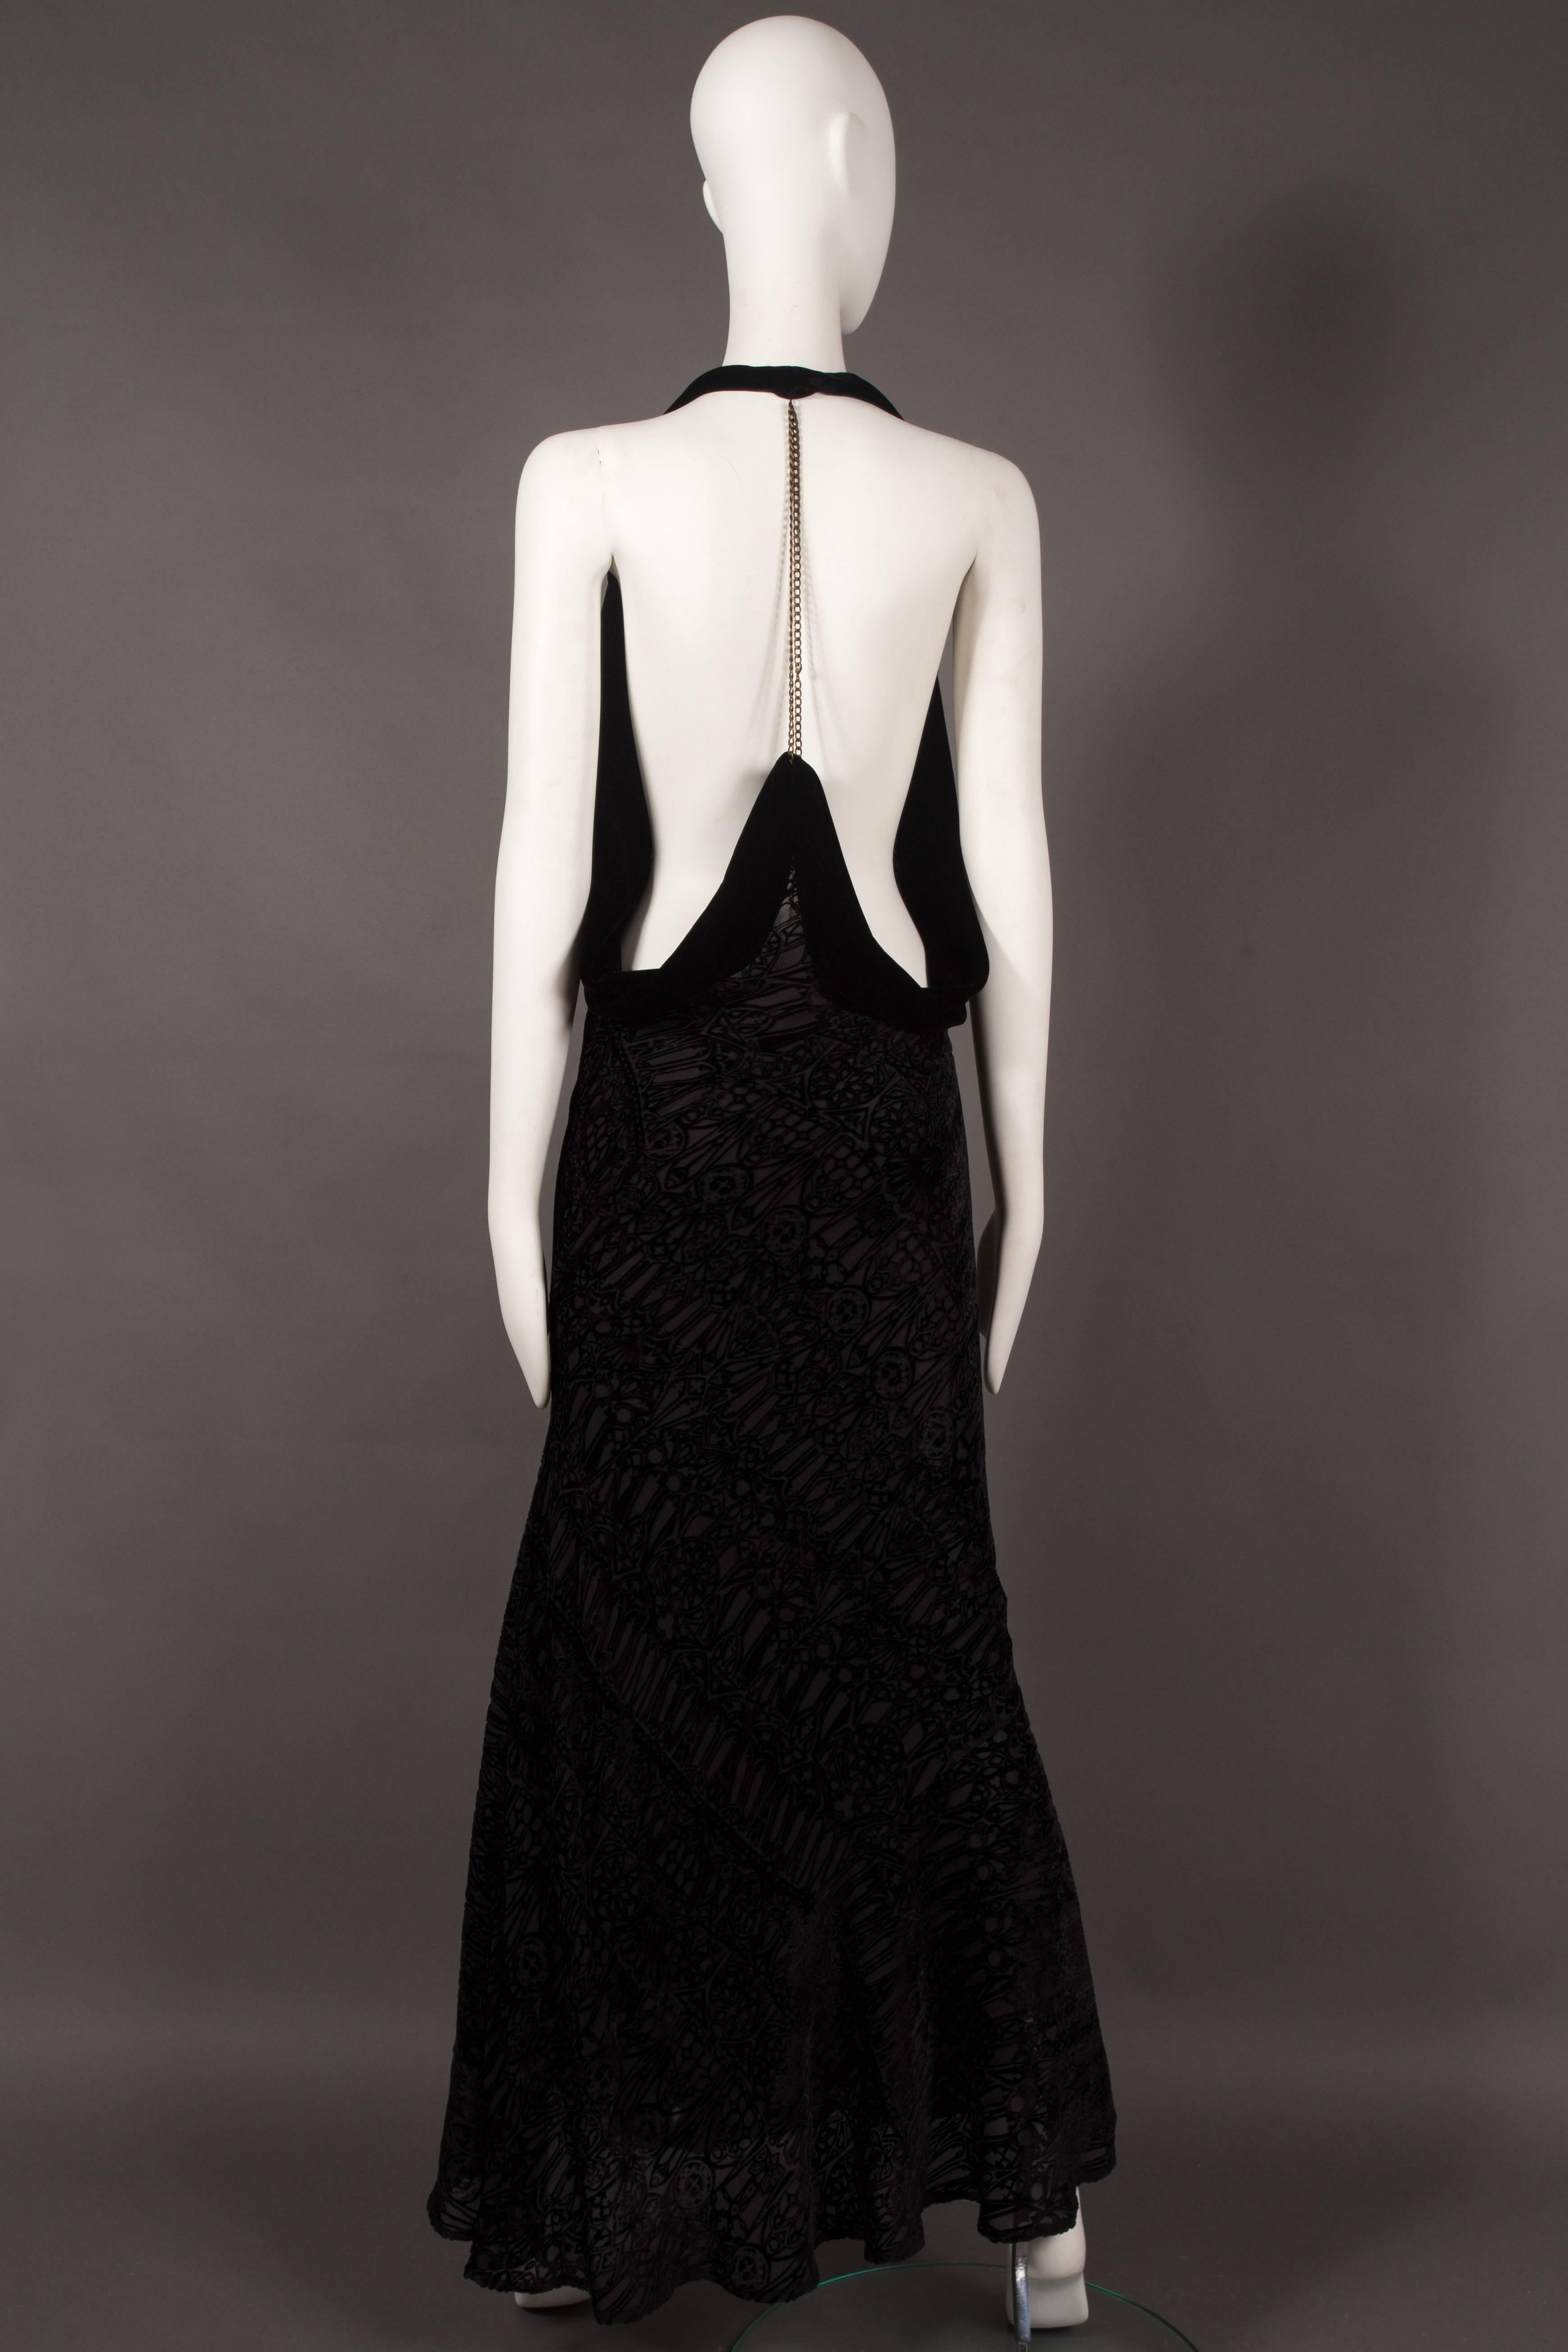 Alexander McQueen black silk devore bias cut evening dress, circa 2004. 

Velvet halter neck, open back, chain hangs from the collar at rear and attaches to the skirt, cowl neck, and ruffled skirt. 